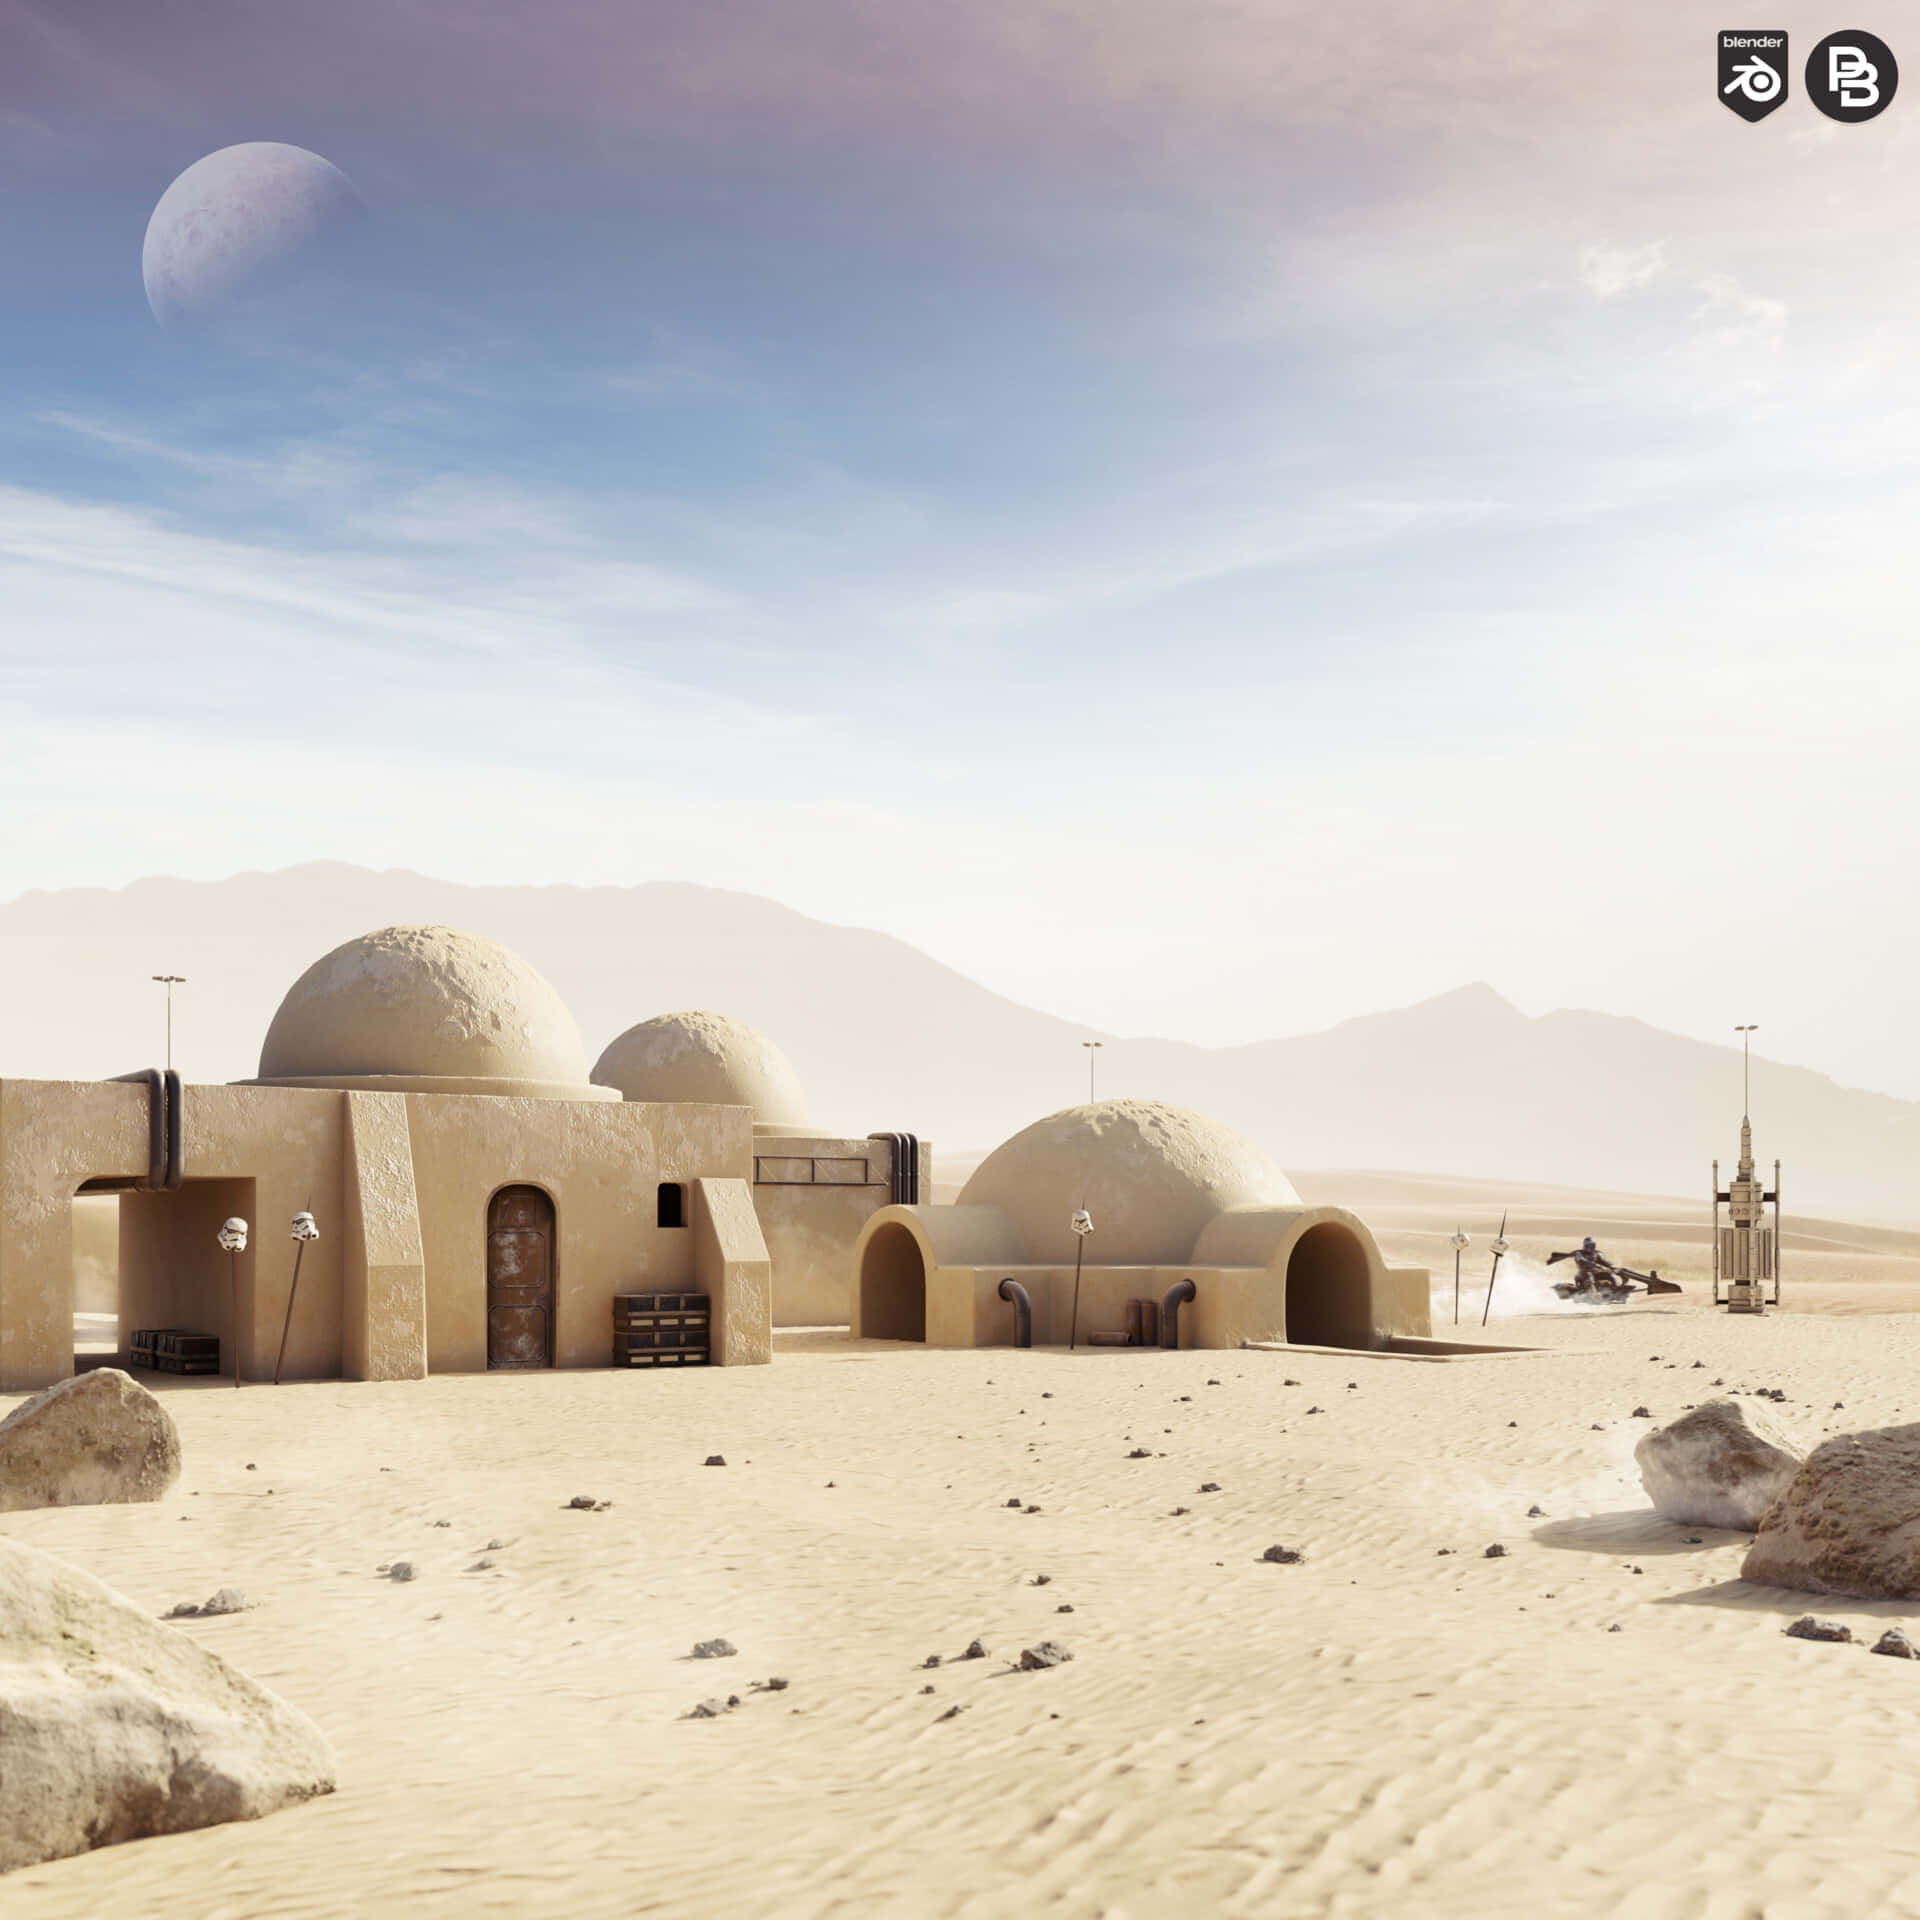 Sun-baked canyon walls on the desert planet of Tatooine Wallpaper